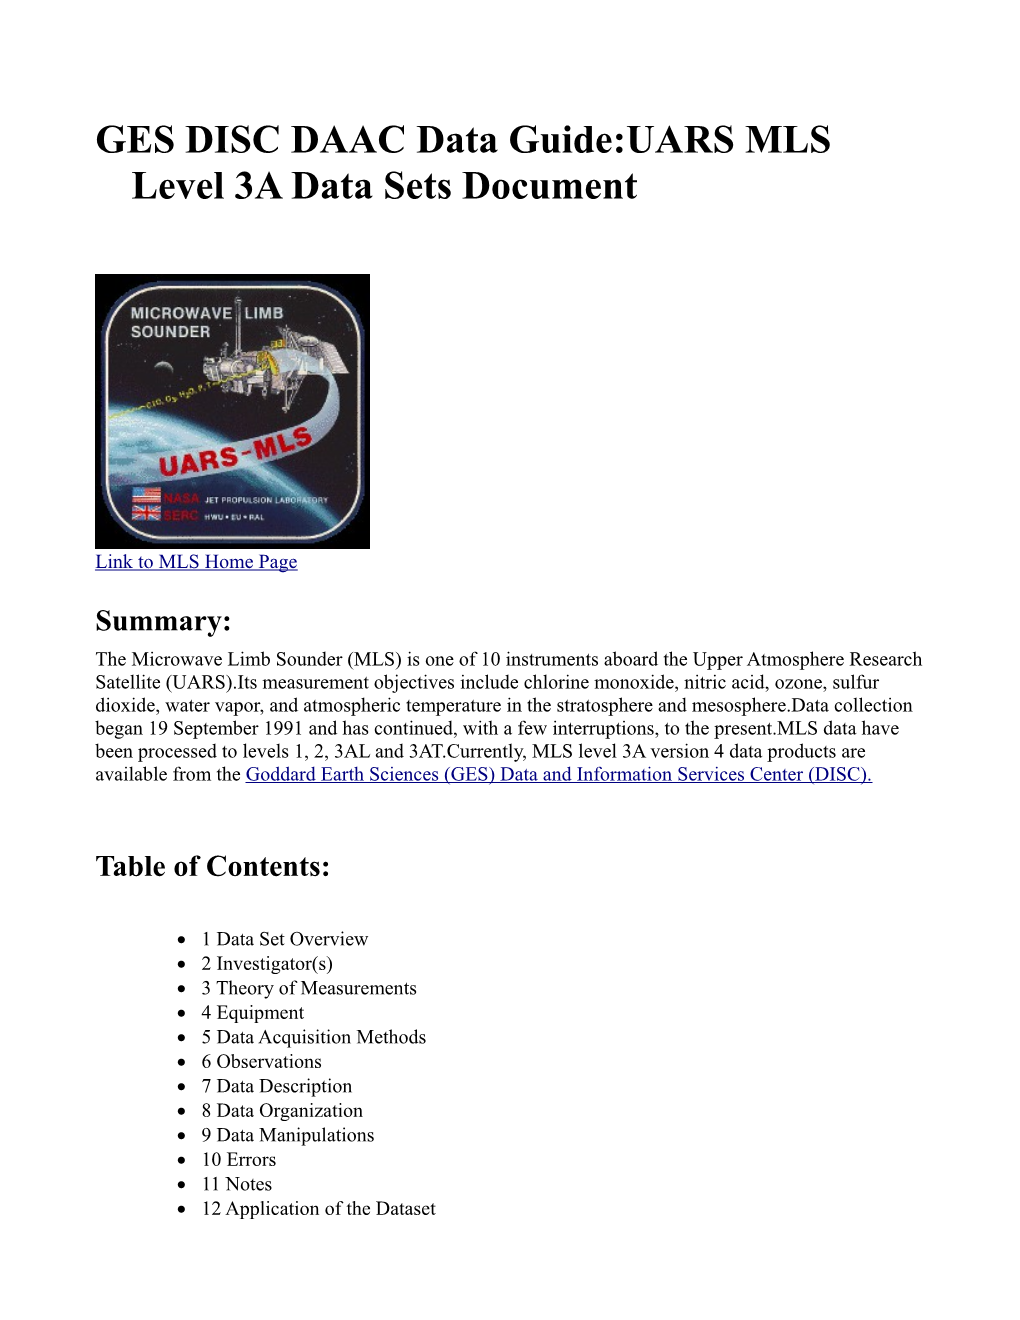 GES DISC DAAC Data Guide:UARS MLS Level 3A Data Sets Document